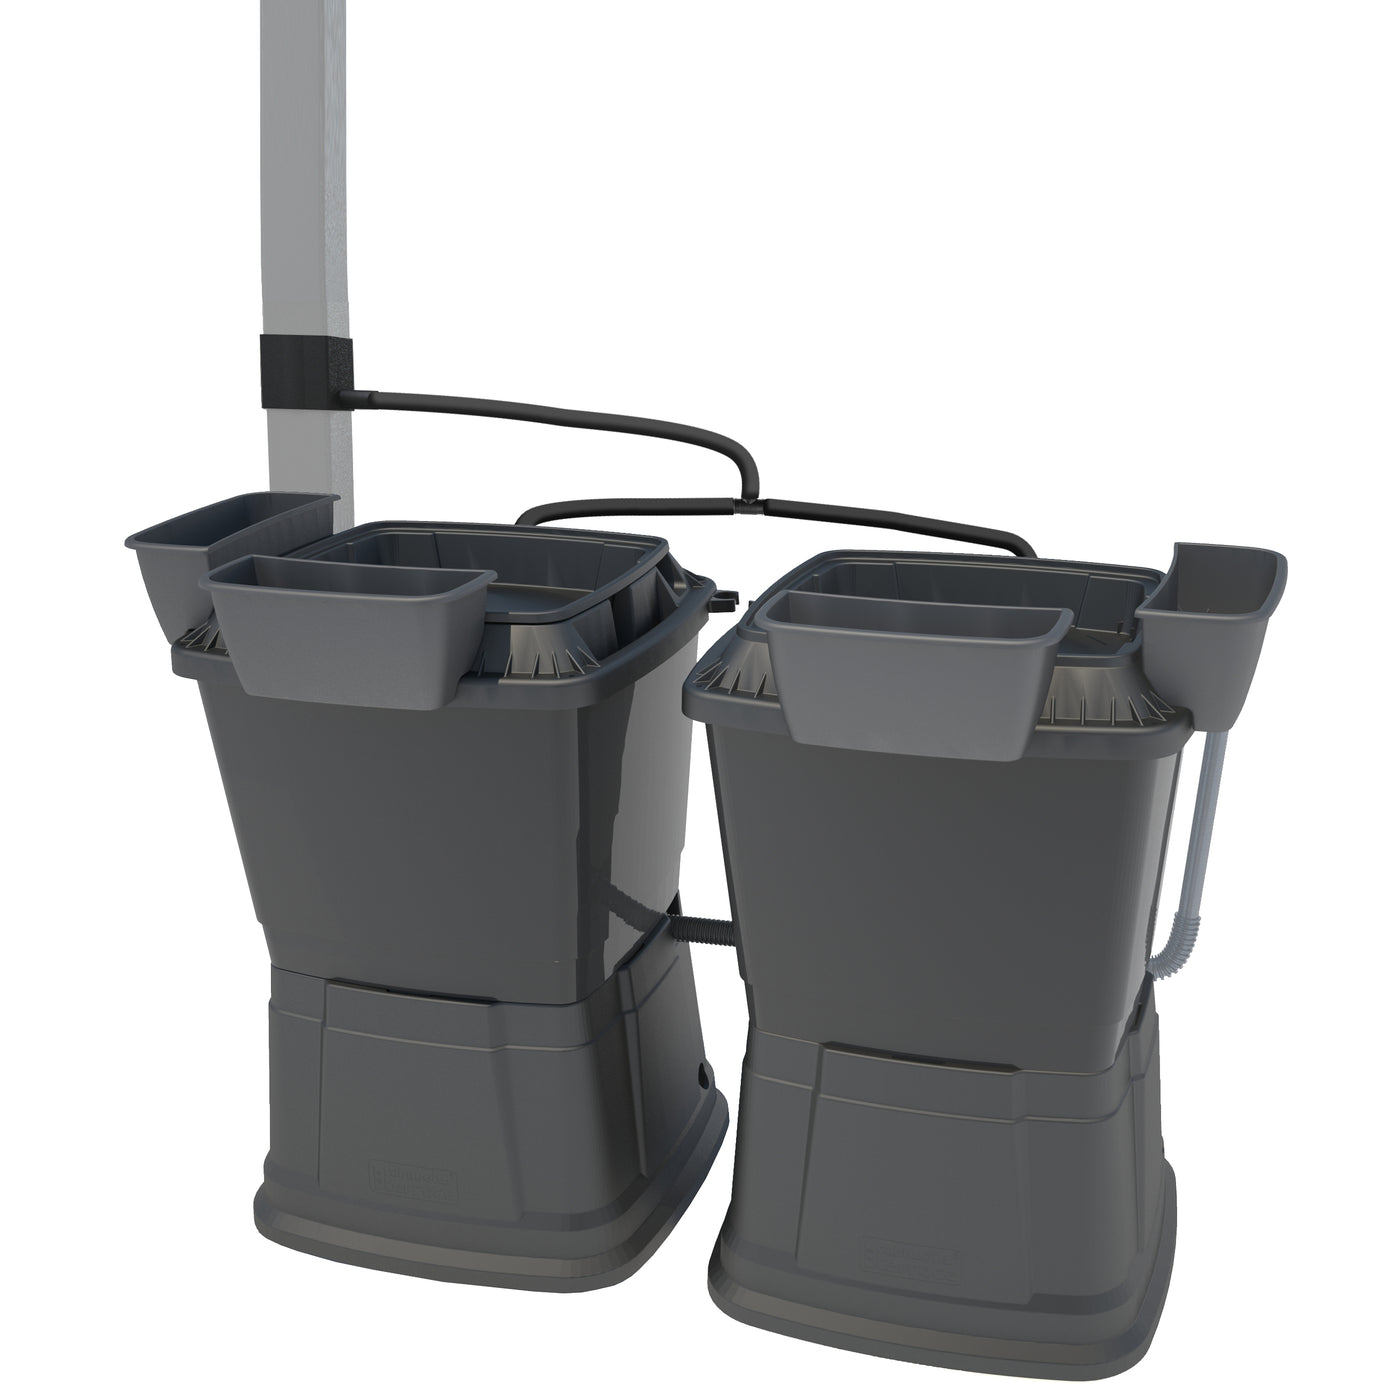 1 Tier Double 134 Litre Water Butt With Planters